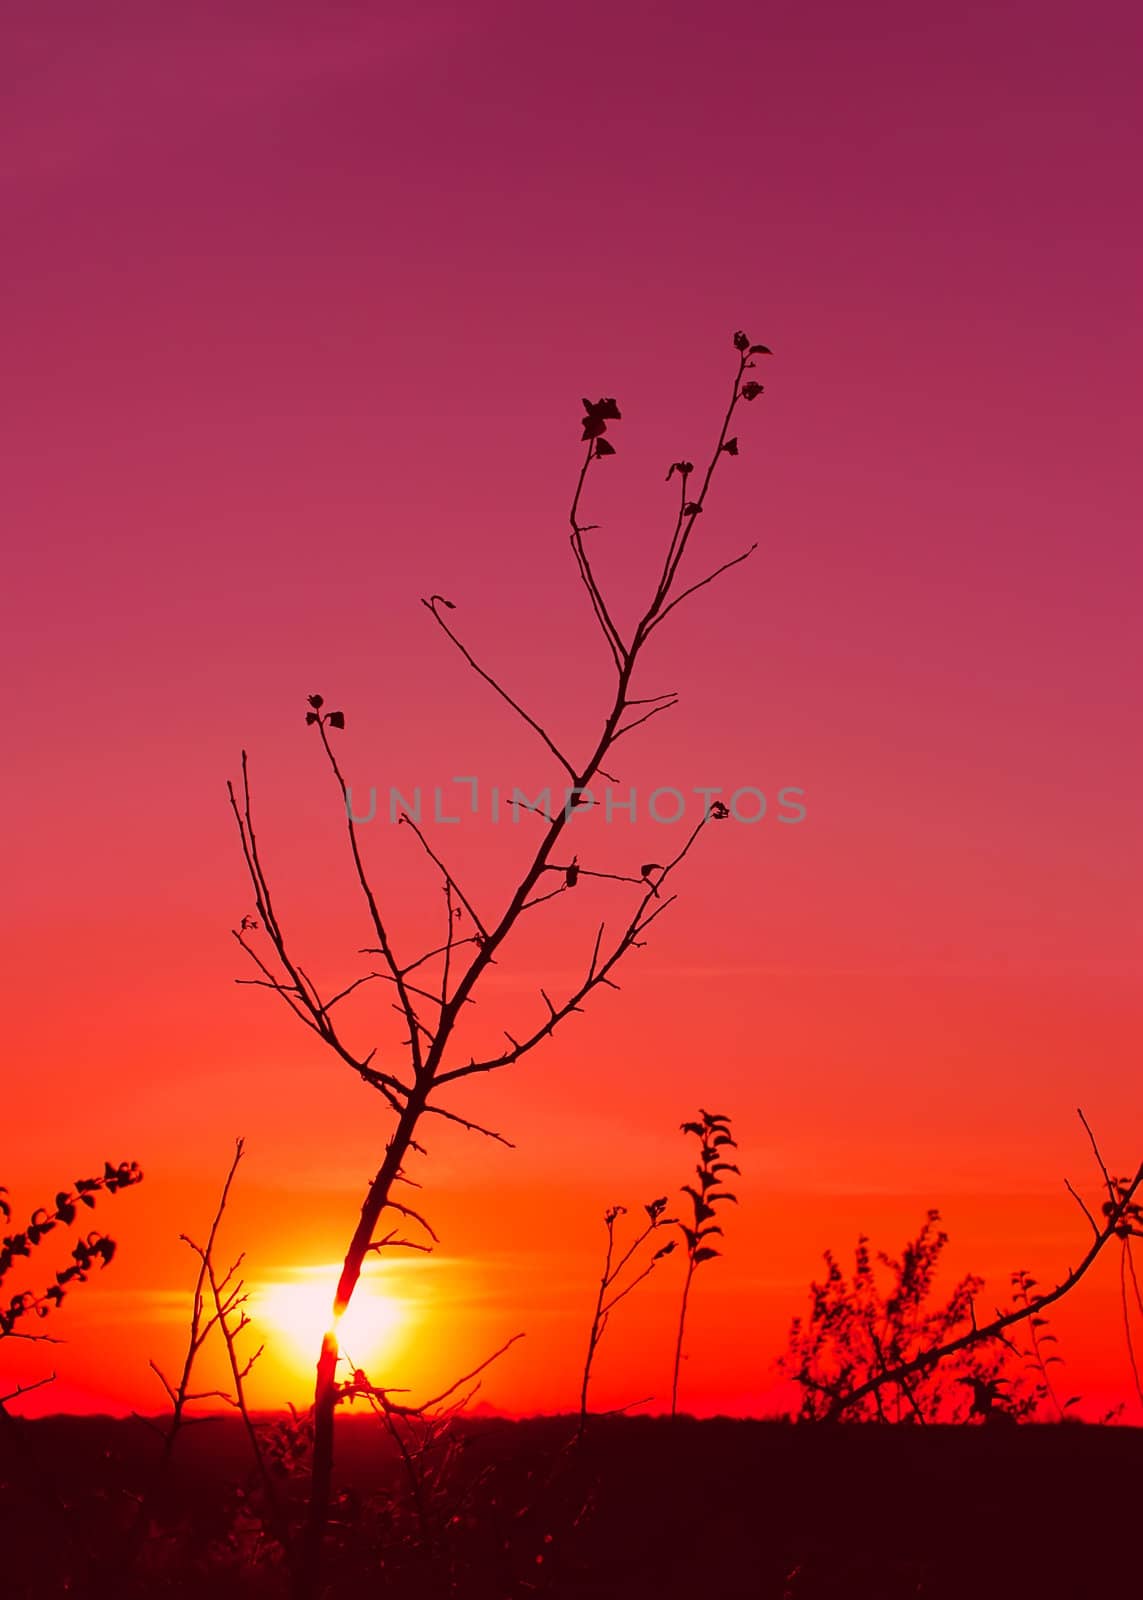 Sunset in the fall (I). Silhouettes of trees and weeds in the foreground. The red glow. Edited